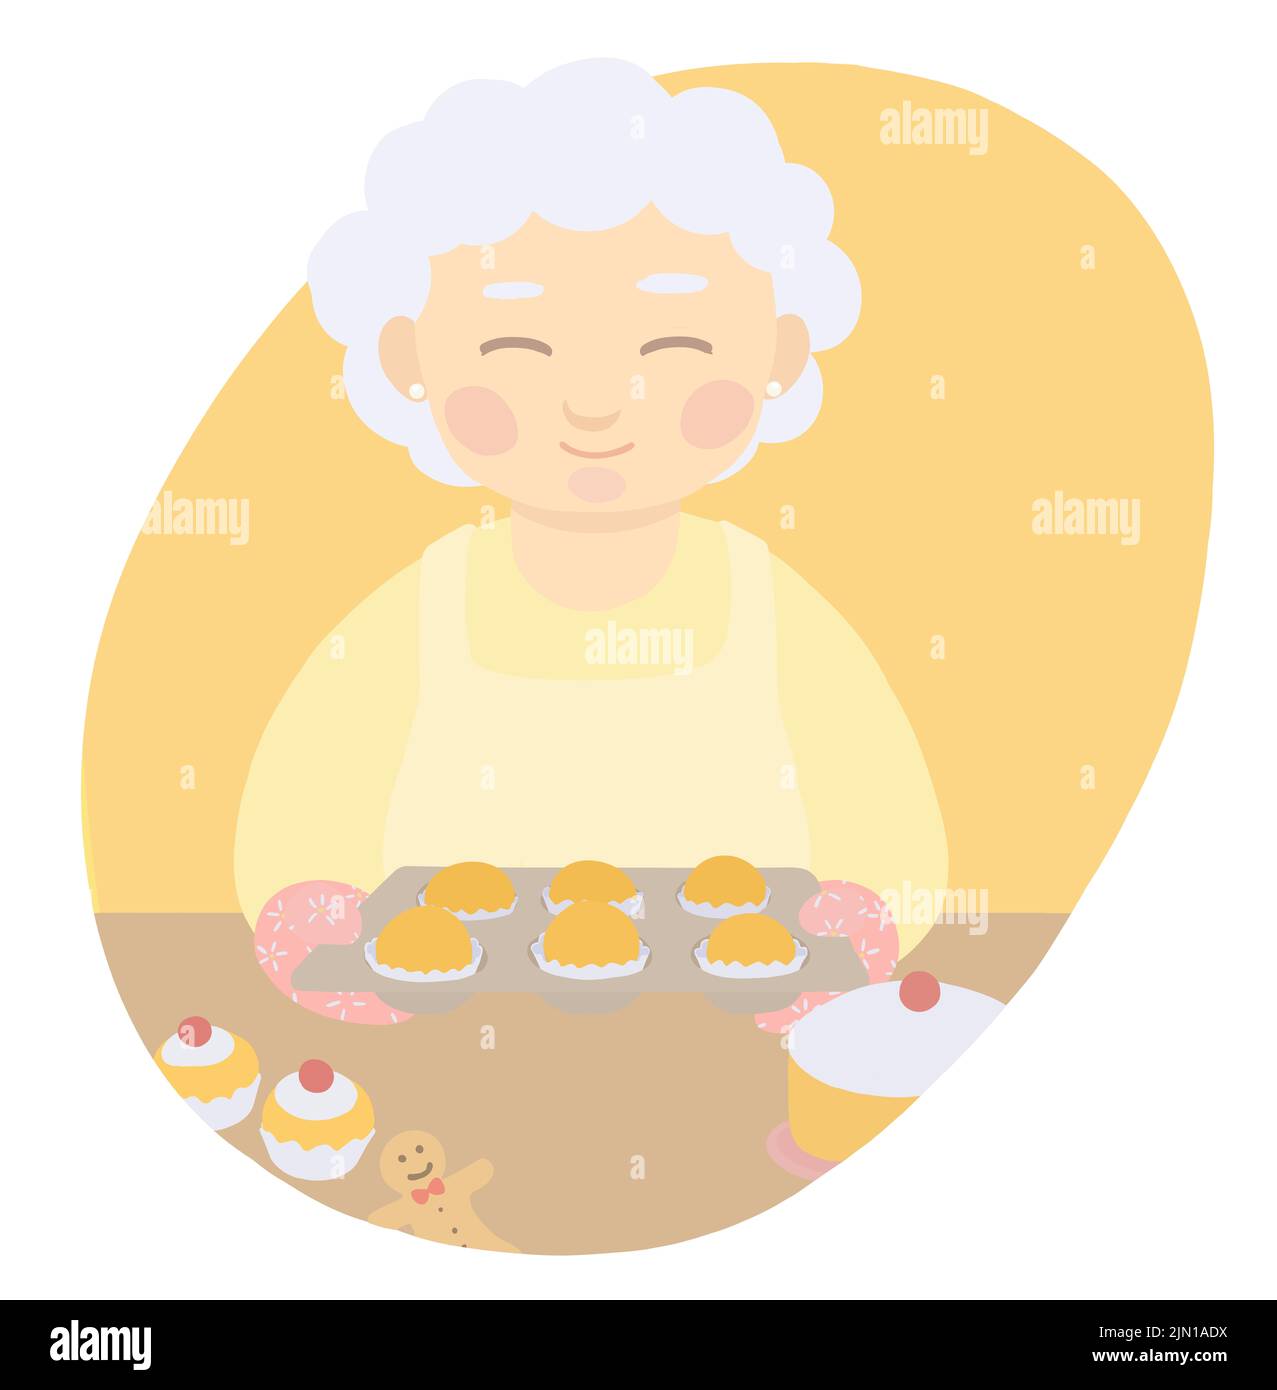 Illustration of grandmother holding tray of cupcakes. Stock Photo